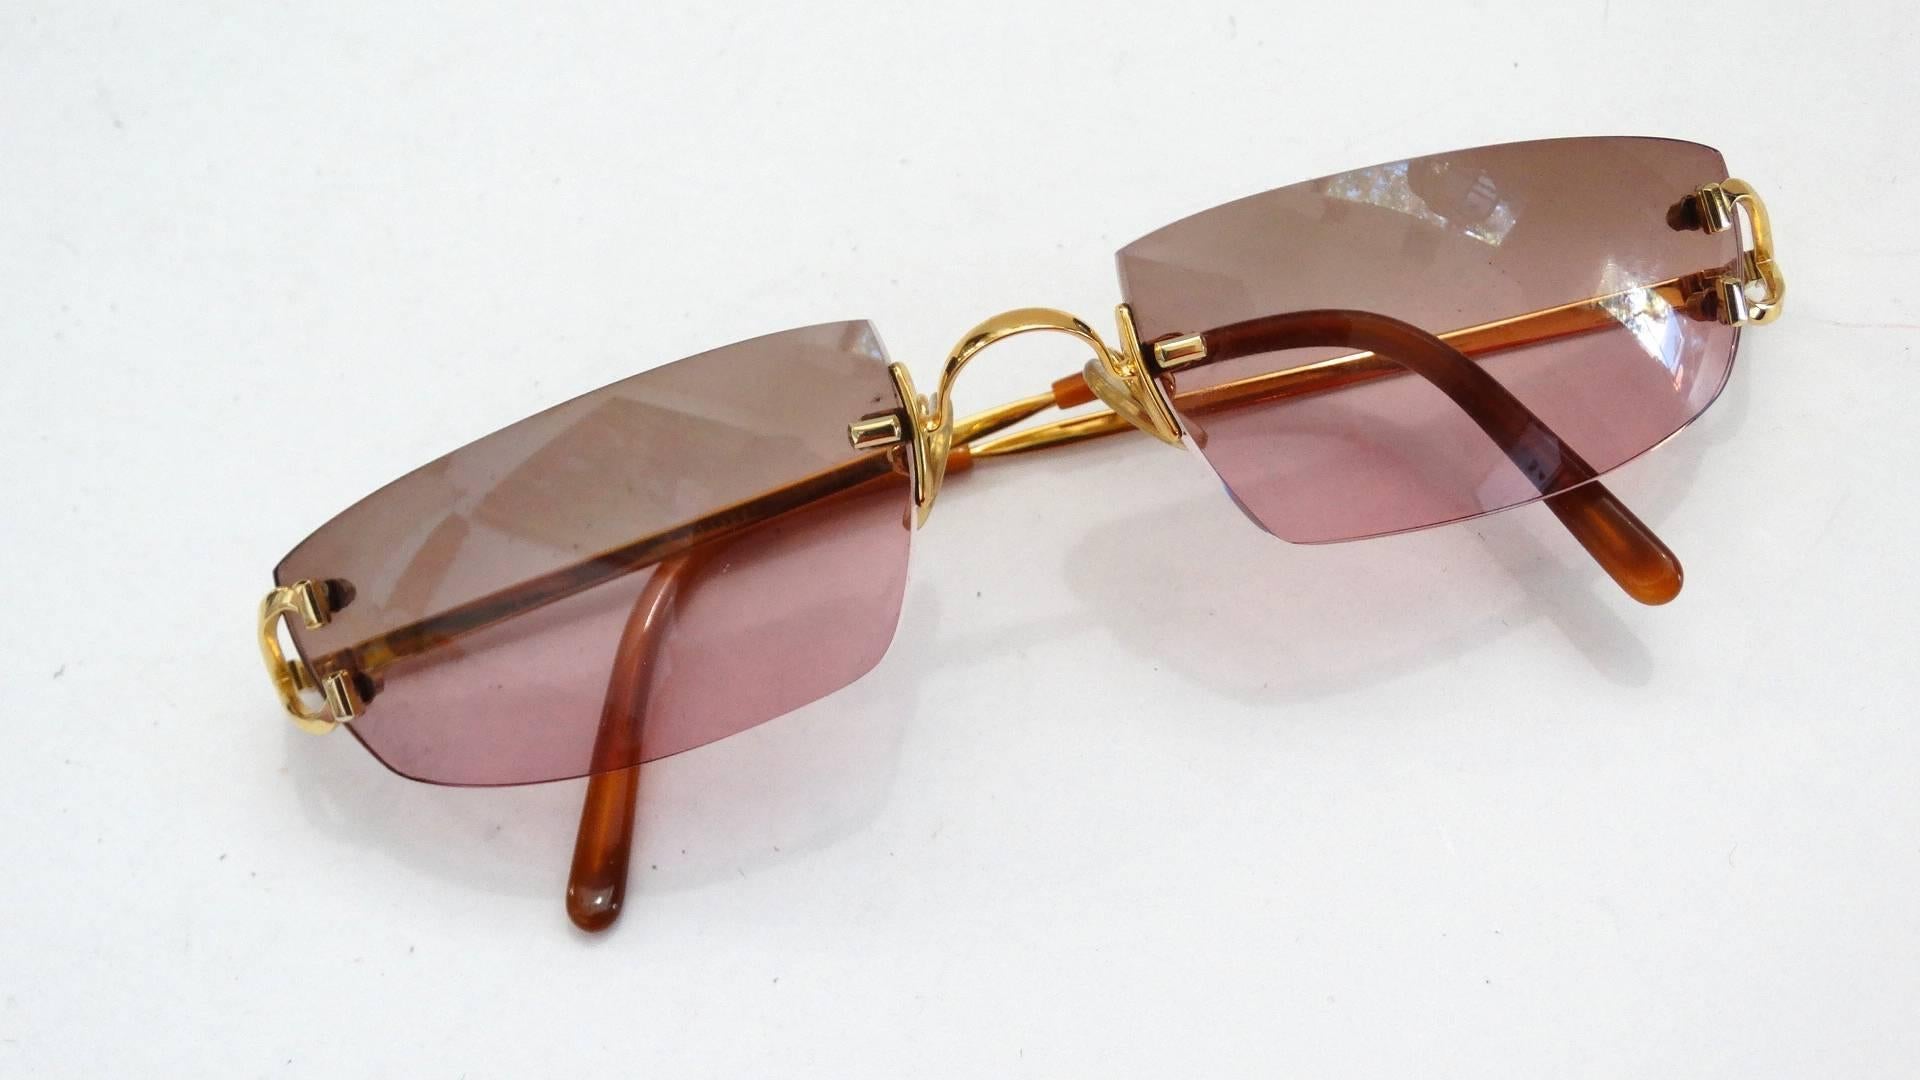 Cartier is always in style! These sunglasses are no exception, made with thick cut lenses in a pink ombre fade, contrasted by the gold wire frame. Rimless style with a unique shape, sharp and straight along the tops of the lens but sloped at the